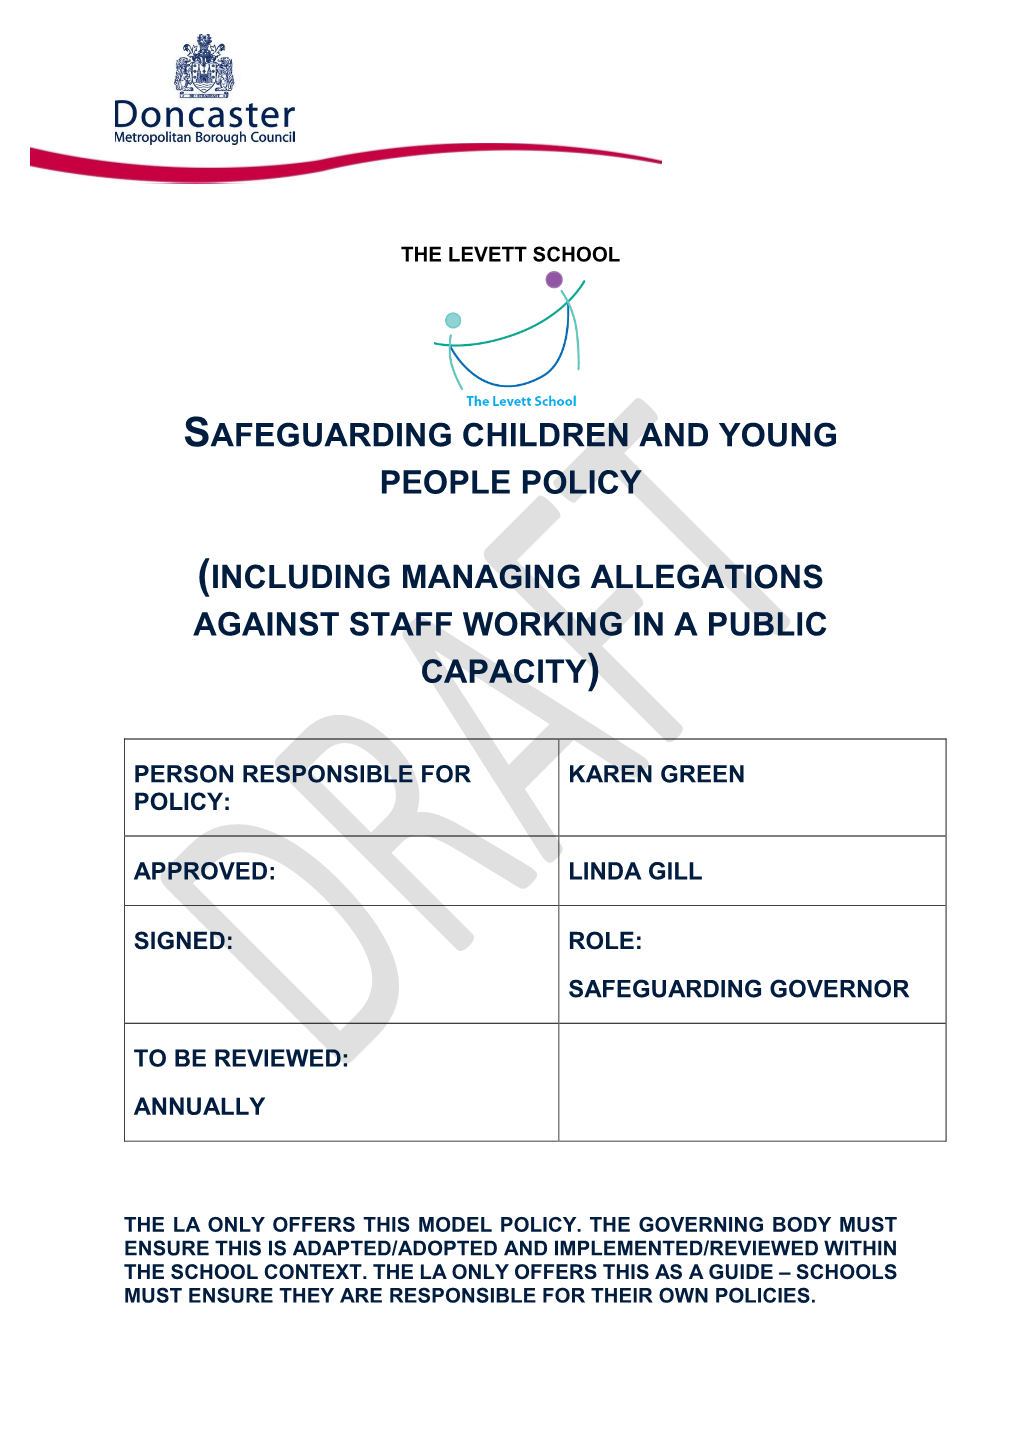 Safeguarding Children and Young People Policy